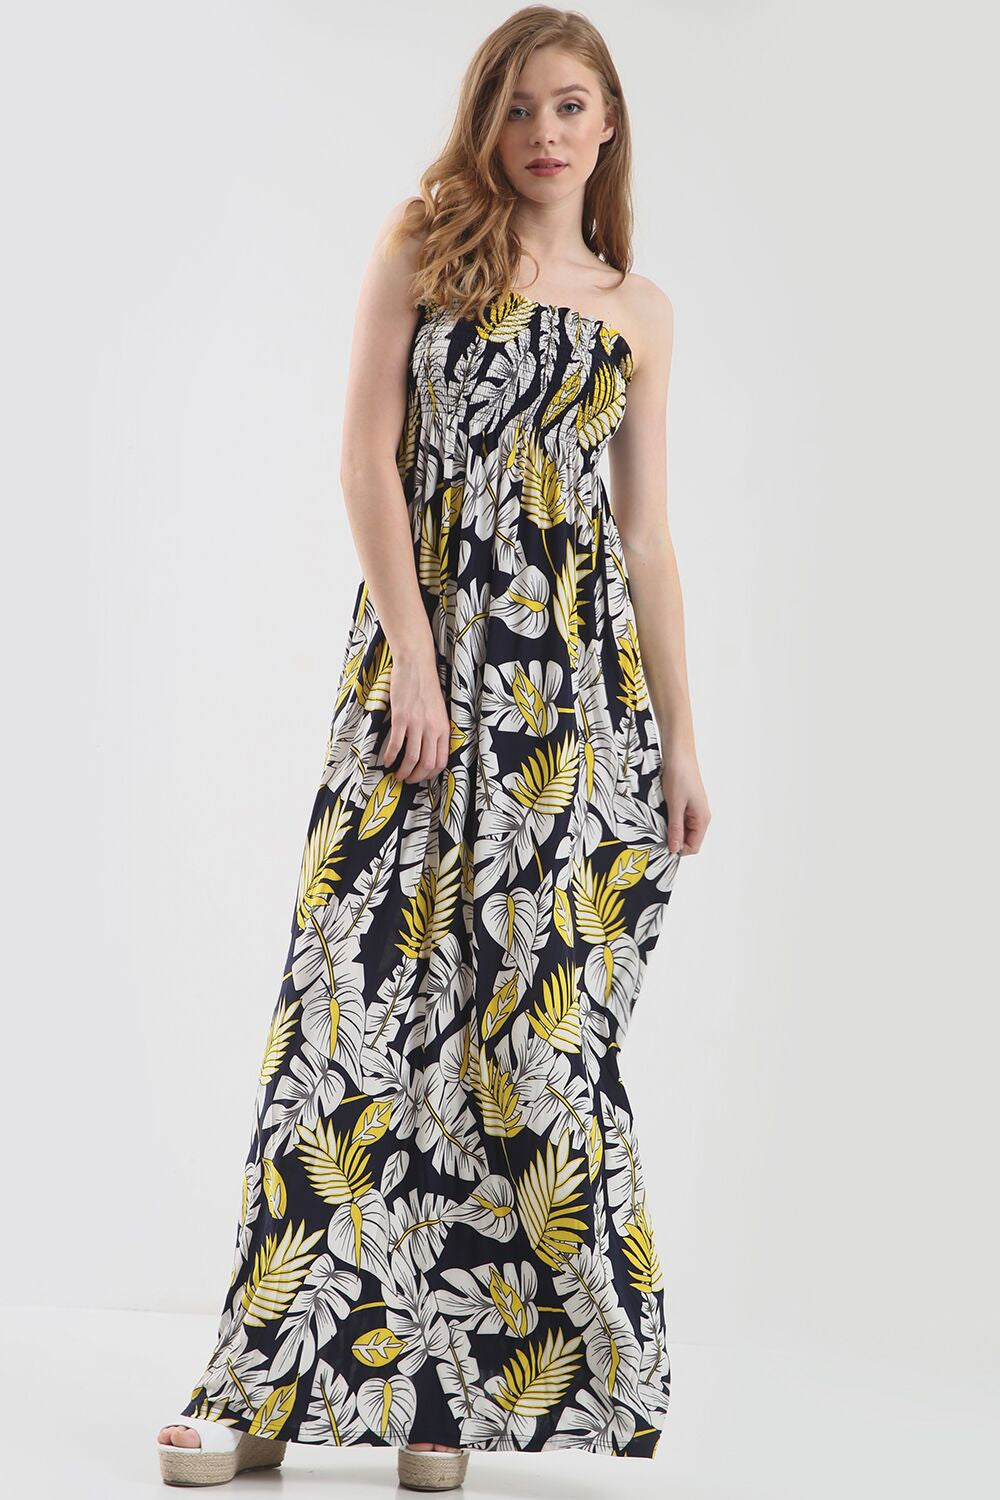 Navy Strapless Maxi Dress in Yellow Tropical Print - bejealous-com